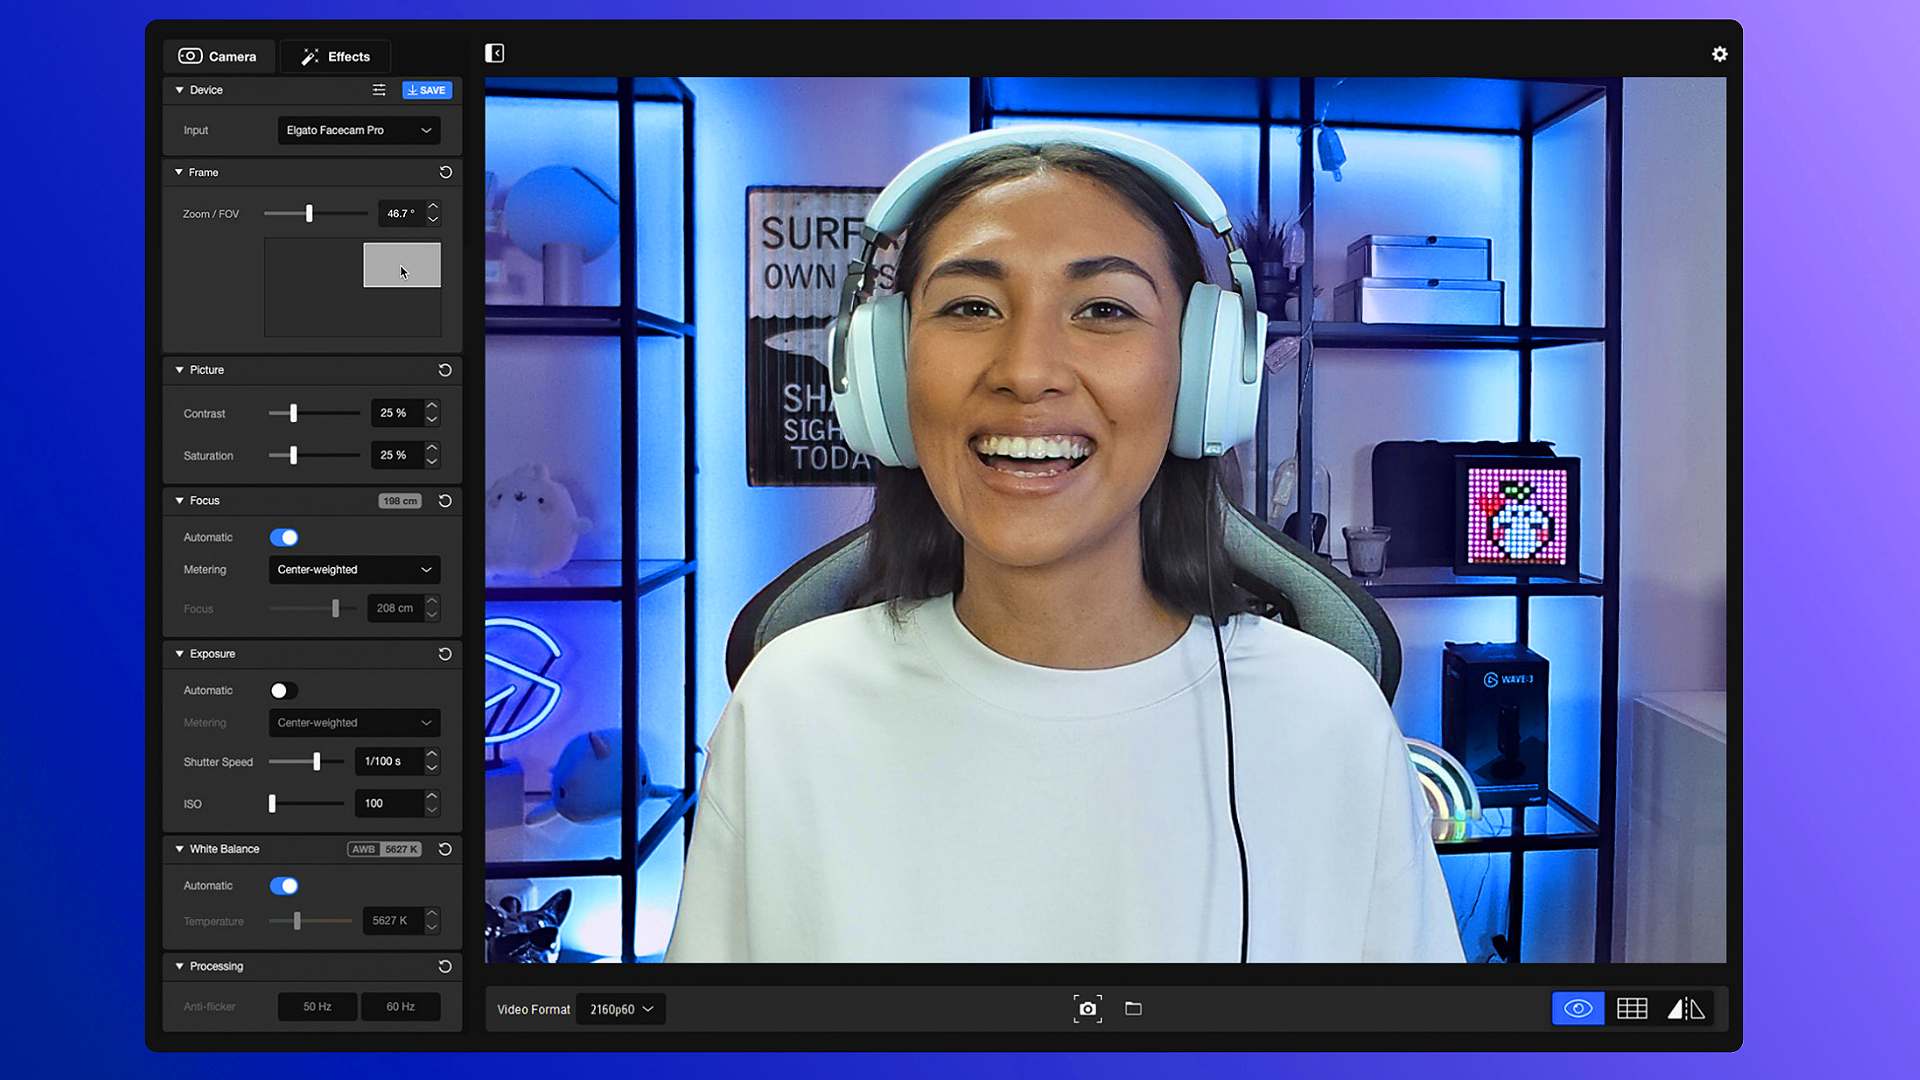 Elgato Camera hub window with femme presenting streamer wearing white headphones and top